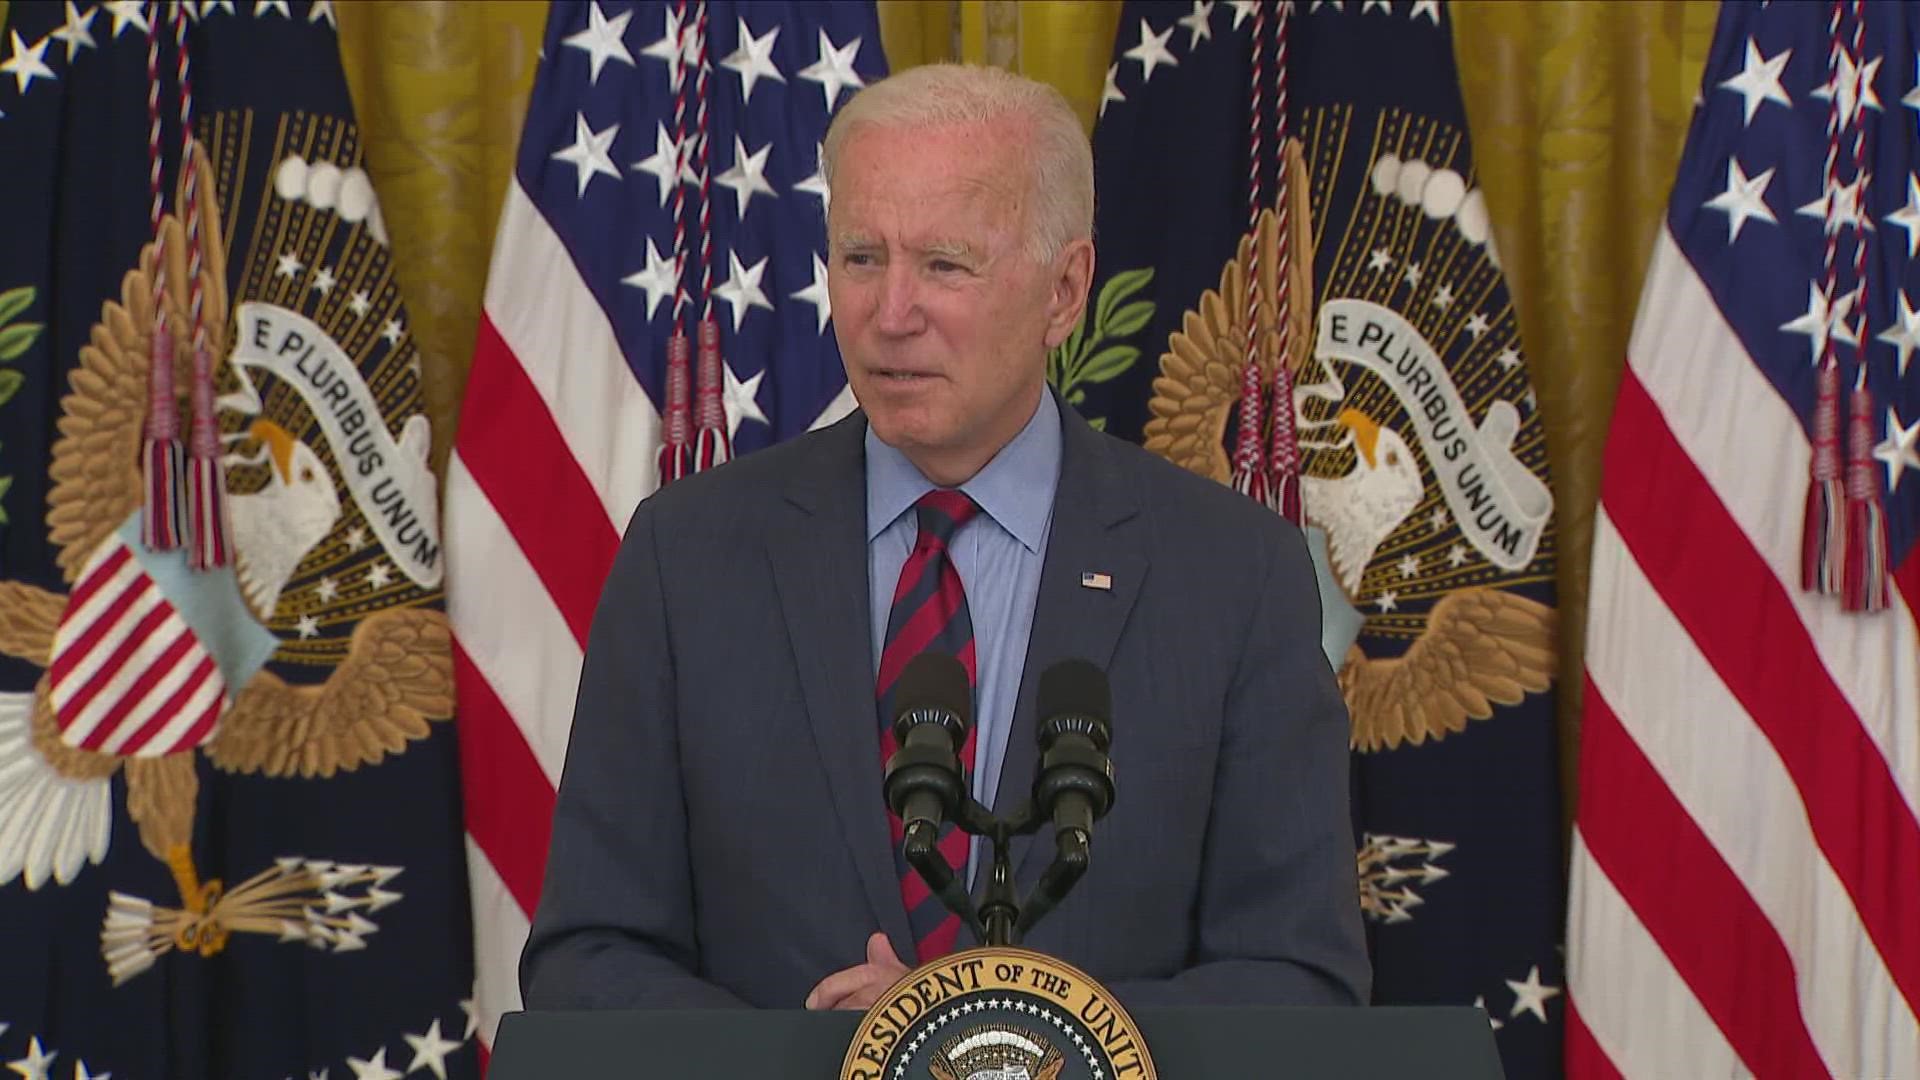 President Biden says New York Gov. Andrew Cuomo should resign, now that an investigation found Cuomo sexually harassed multiple government employees.